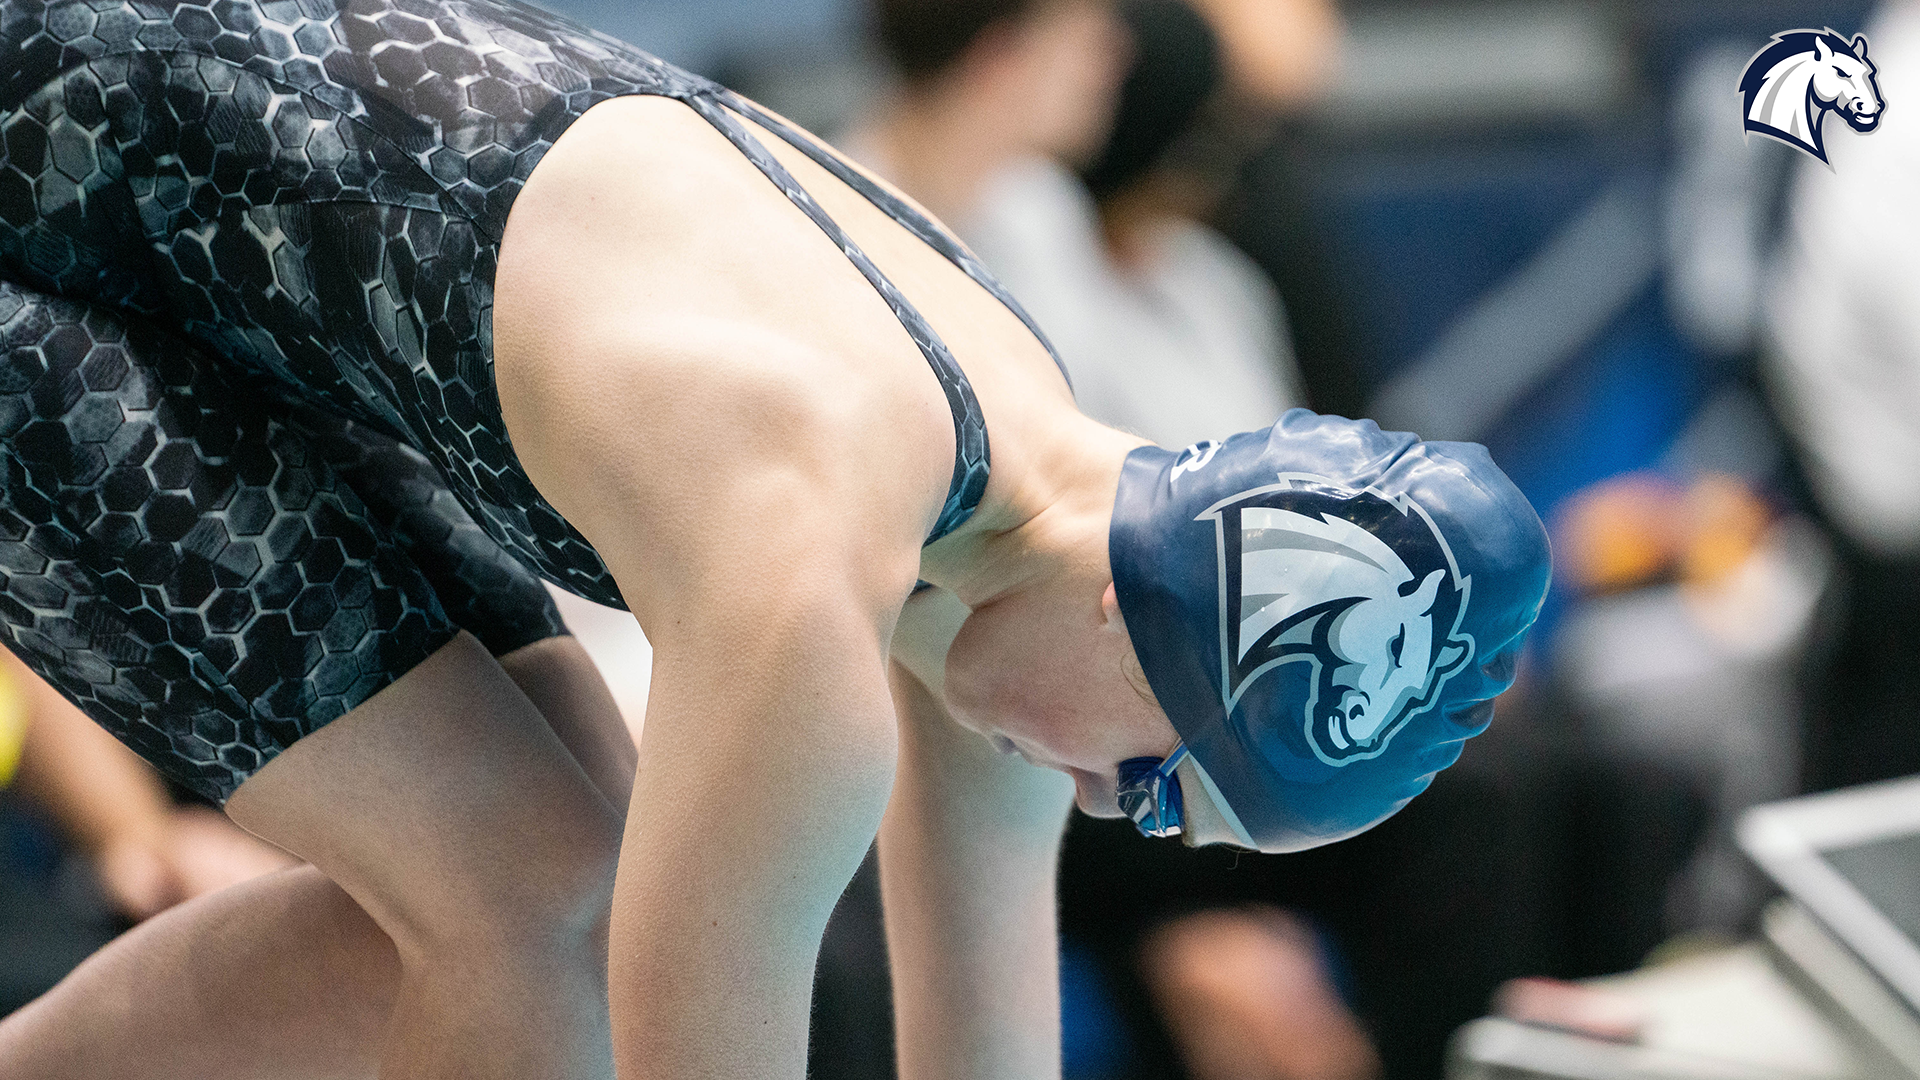 Chargers' Elise Mason earns All-American honors with massive PR in 1,650 freestyle